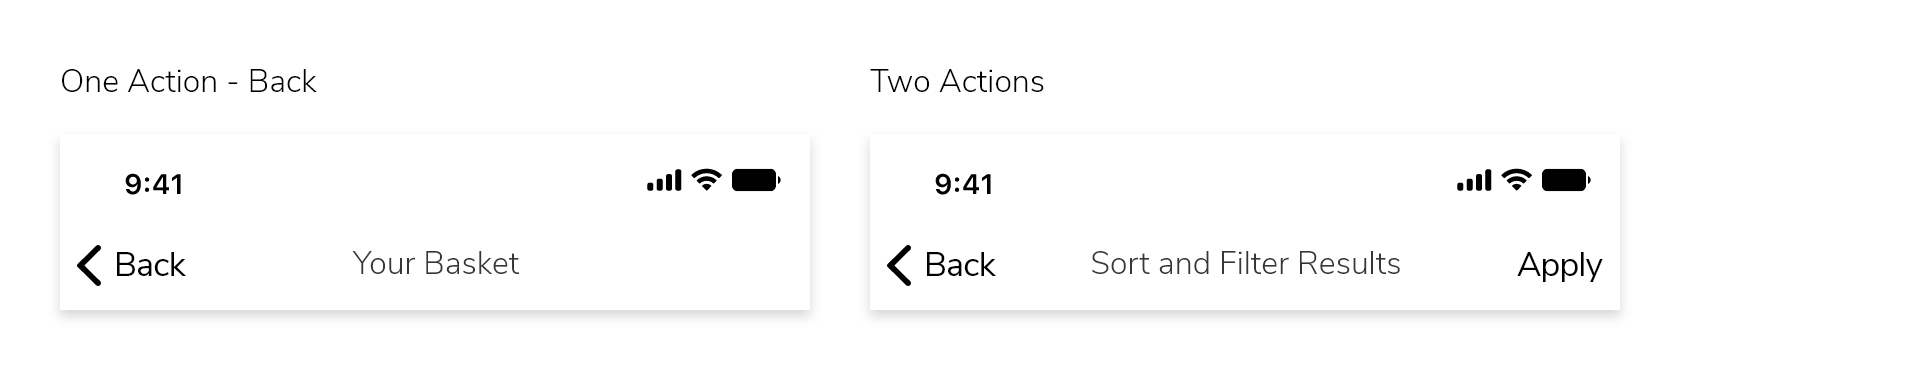 The Top Navigation Element showing Left and Right side action prompts